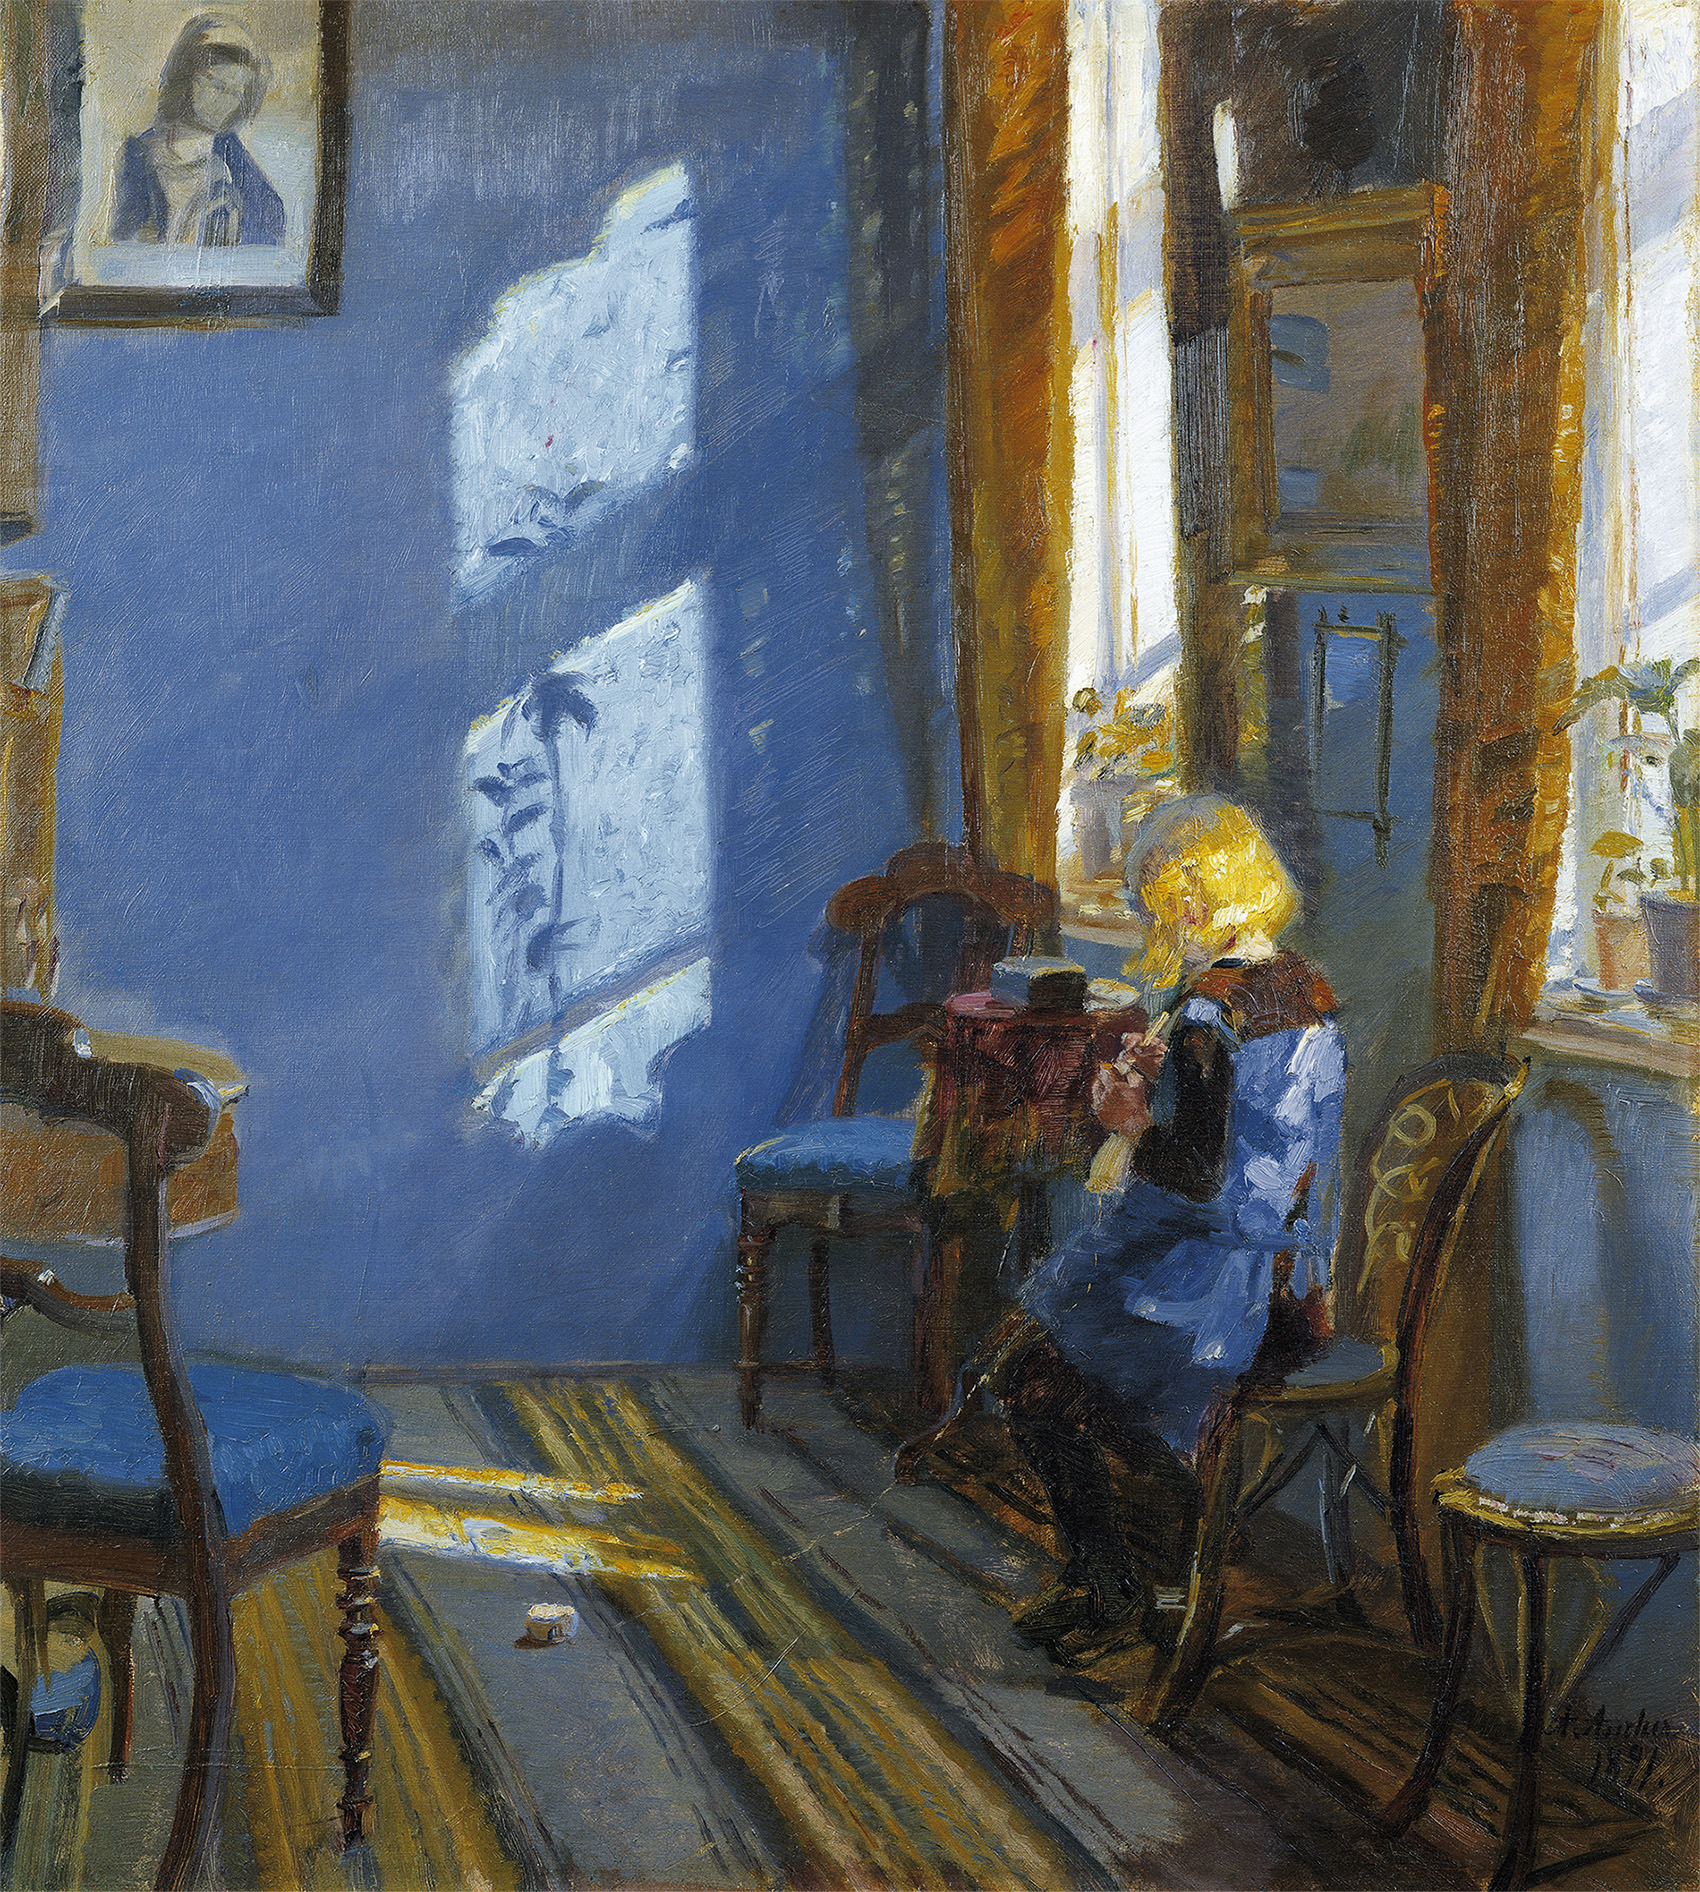 Sunlight in the Blue Room by Anna Ancher - 1891 - 65.2 x 58.8 cm Skagens Kunstmuseer